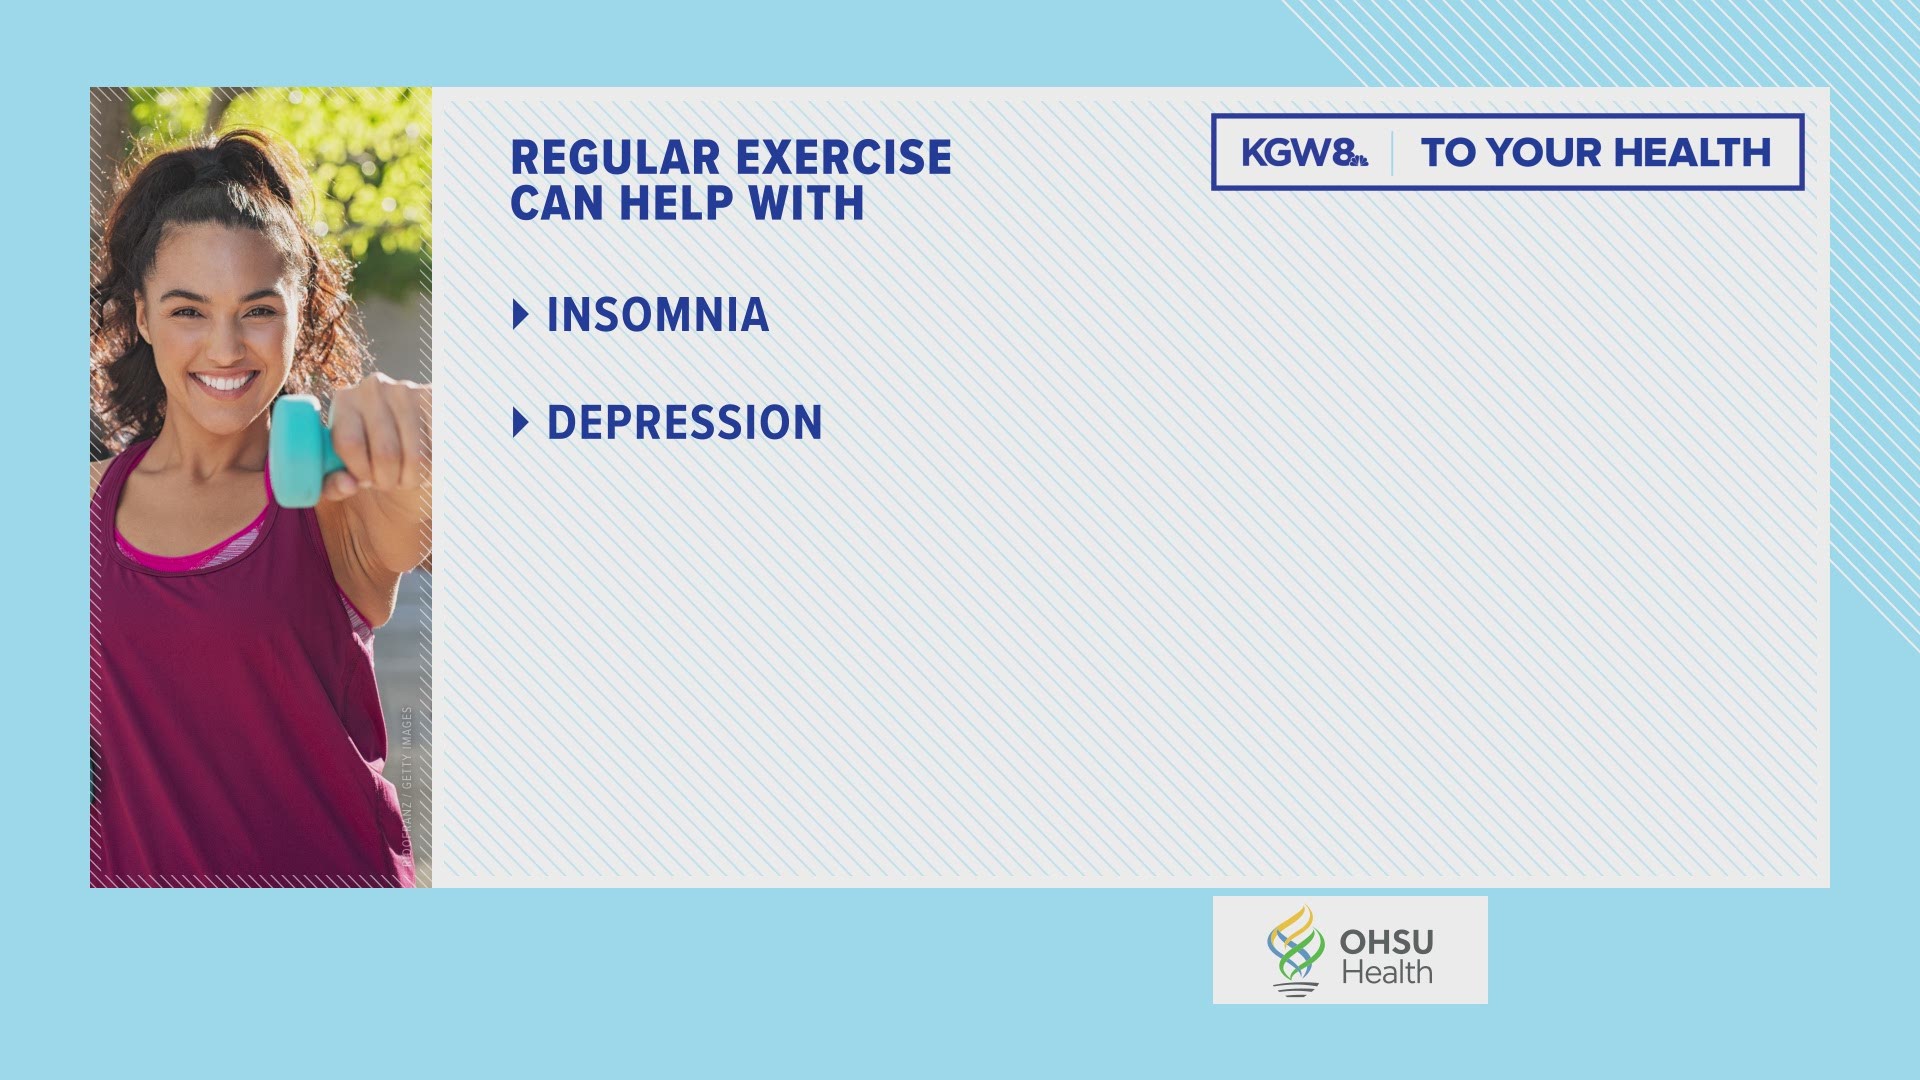 From OHSU Health, here are some ways regular exercise can help improve your life.